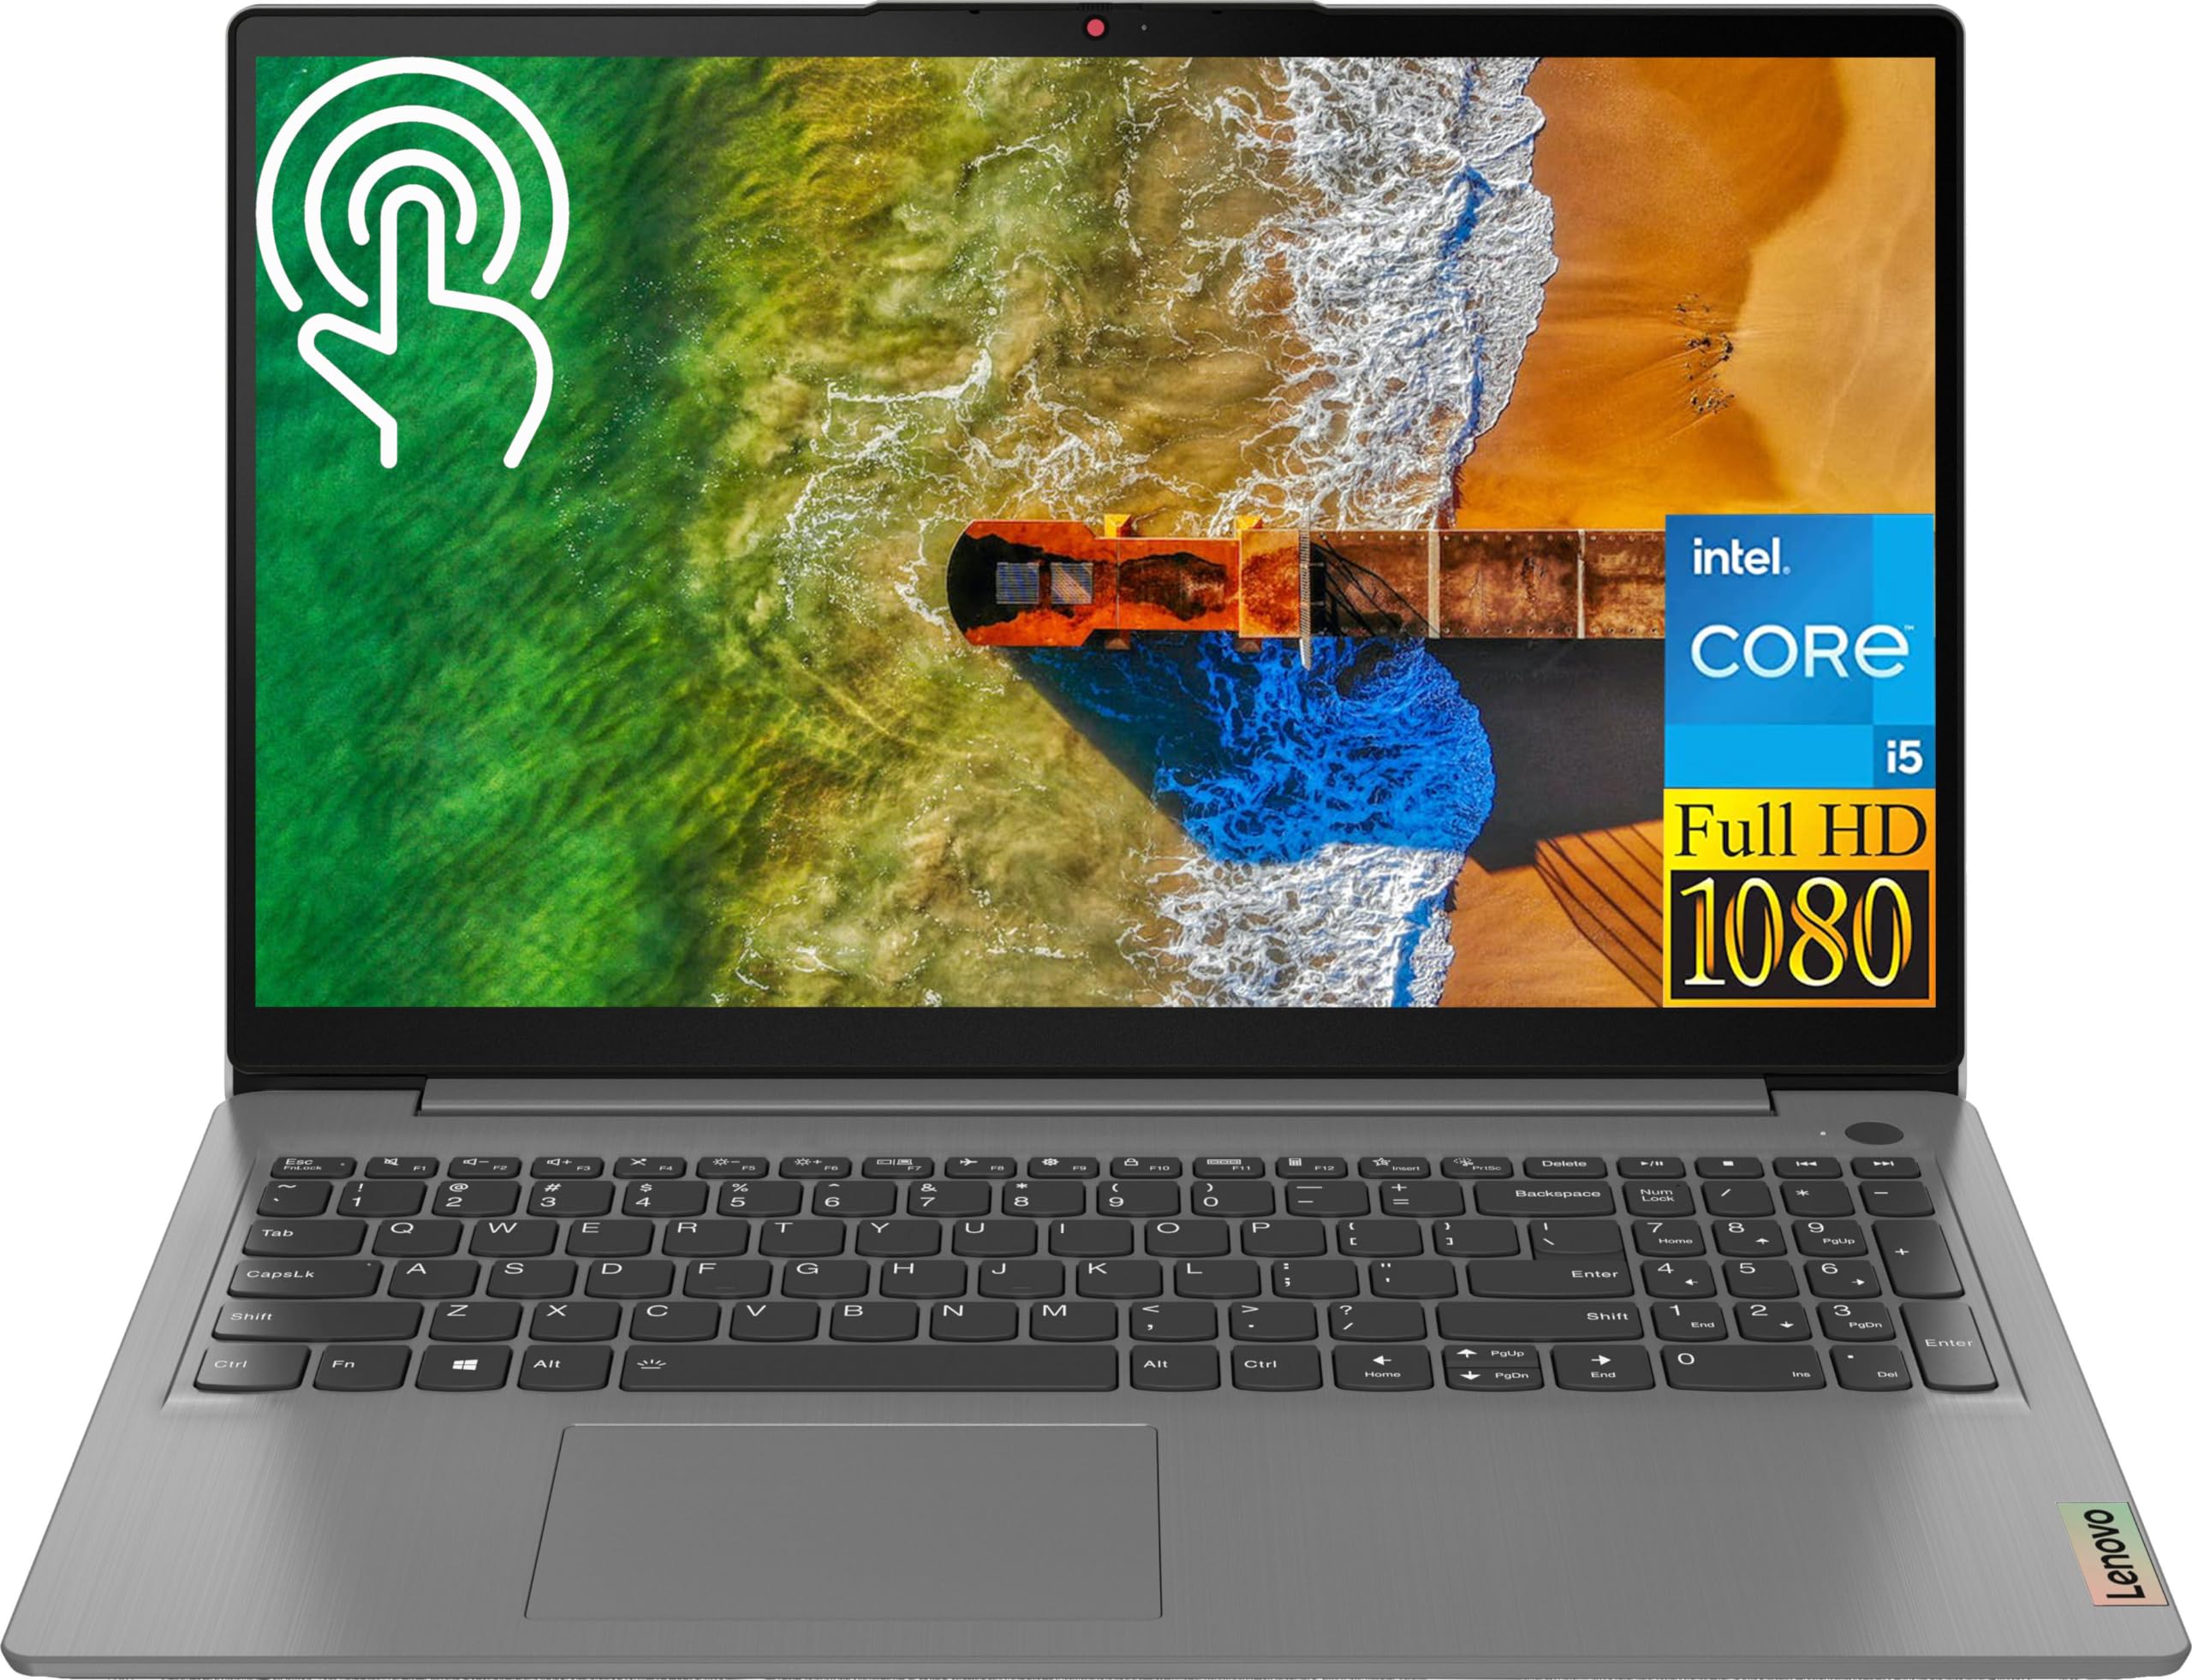 Lenovo 2023 Newest Ideapad 3i Laptop, 15.6" FHD IPS Touchscreen, Intel 4-Core i5-1135G7 Processor (Up to 4.2 GHz), 36GB RAM, 1TB SSD, Intel Iris Xe Graphics, Wi-Fi 6, Windows 11 Home in S Mode